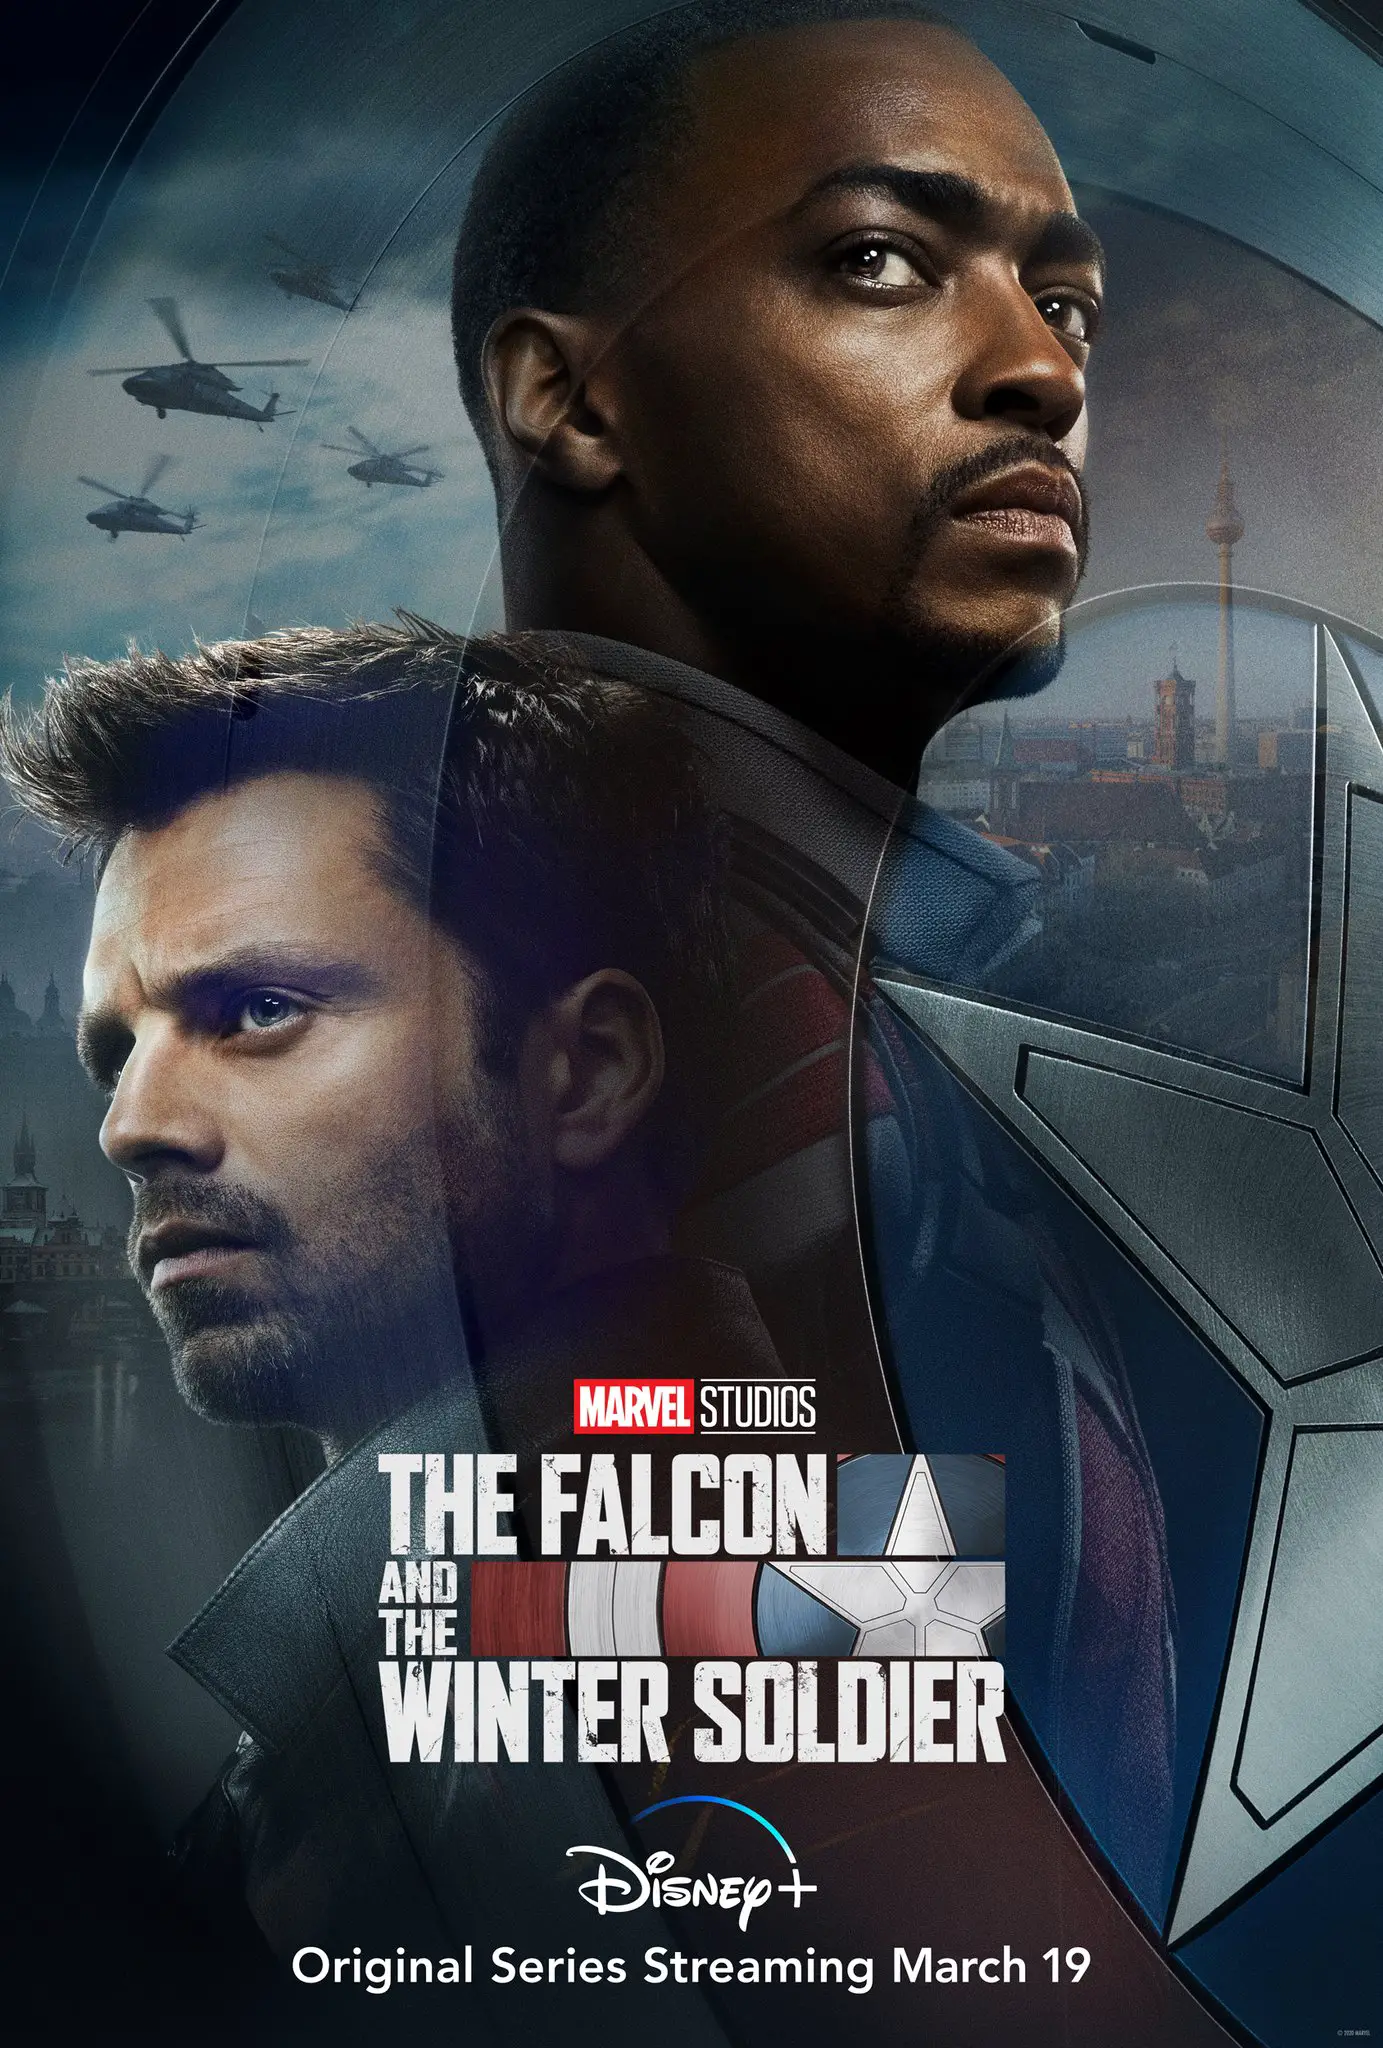 The Falcon and the Winter Soldier Show Poster